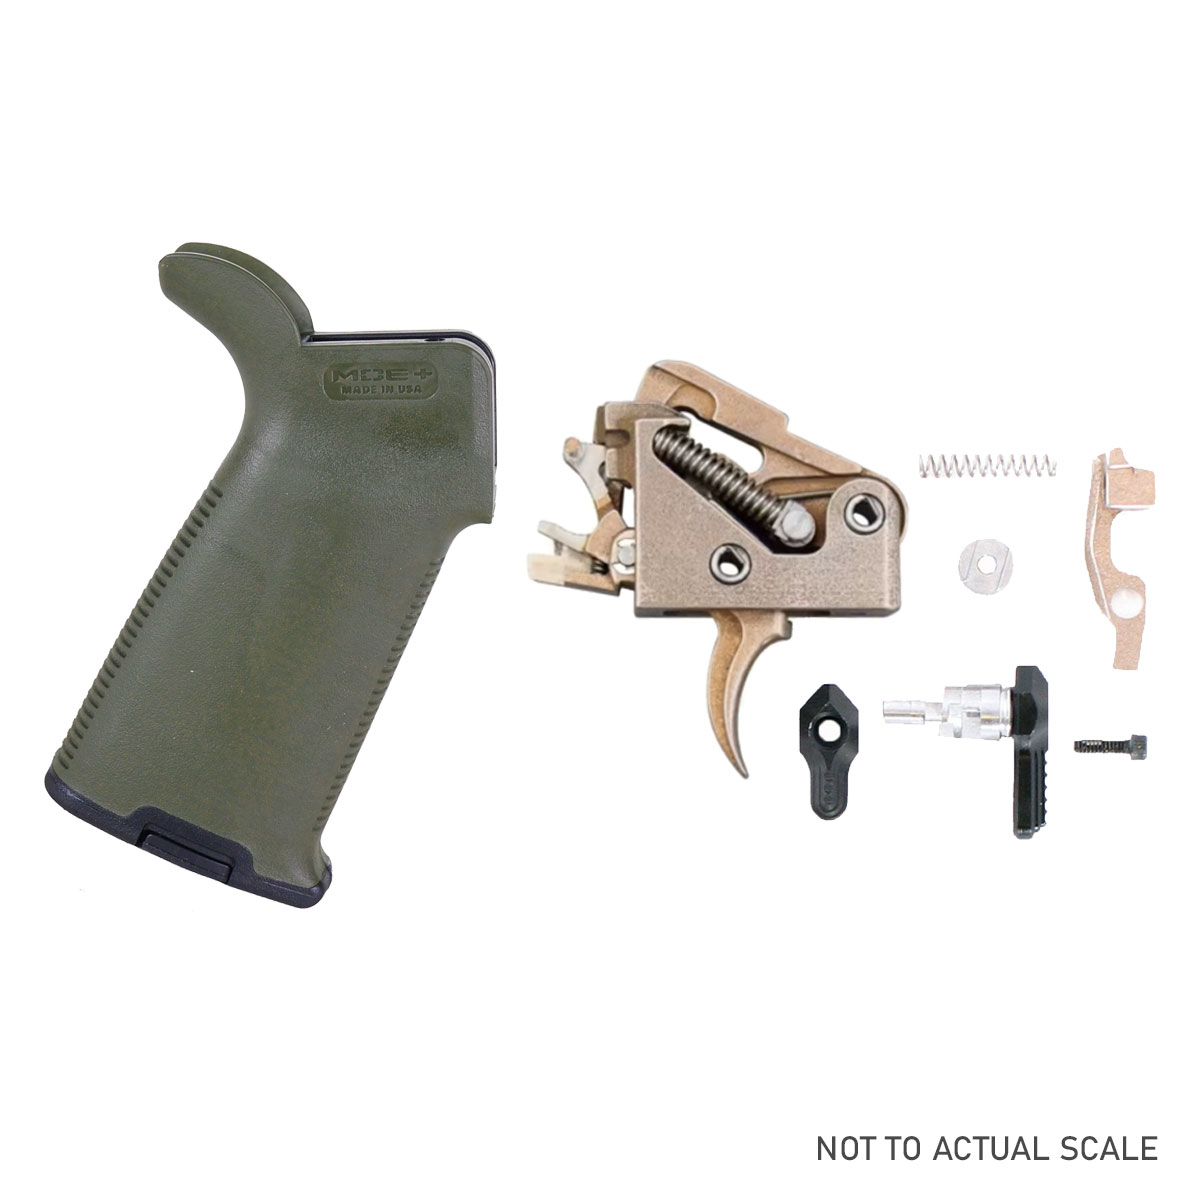 Speed Up Your Lower Kit: Fostech AR-15 Drop In Echo AR-II Binary Trigger + Magpul Industries, MOE Grip, Fits AR Rifles, with Storage Compartment, Olive Drab Green